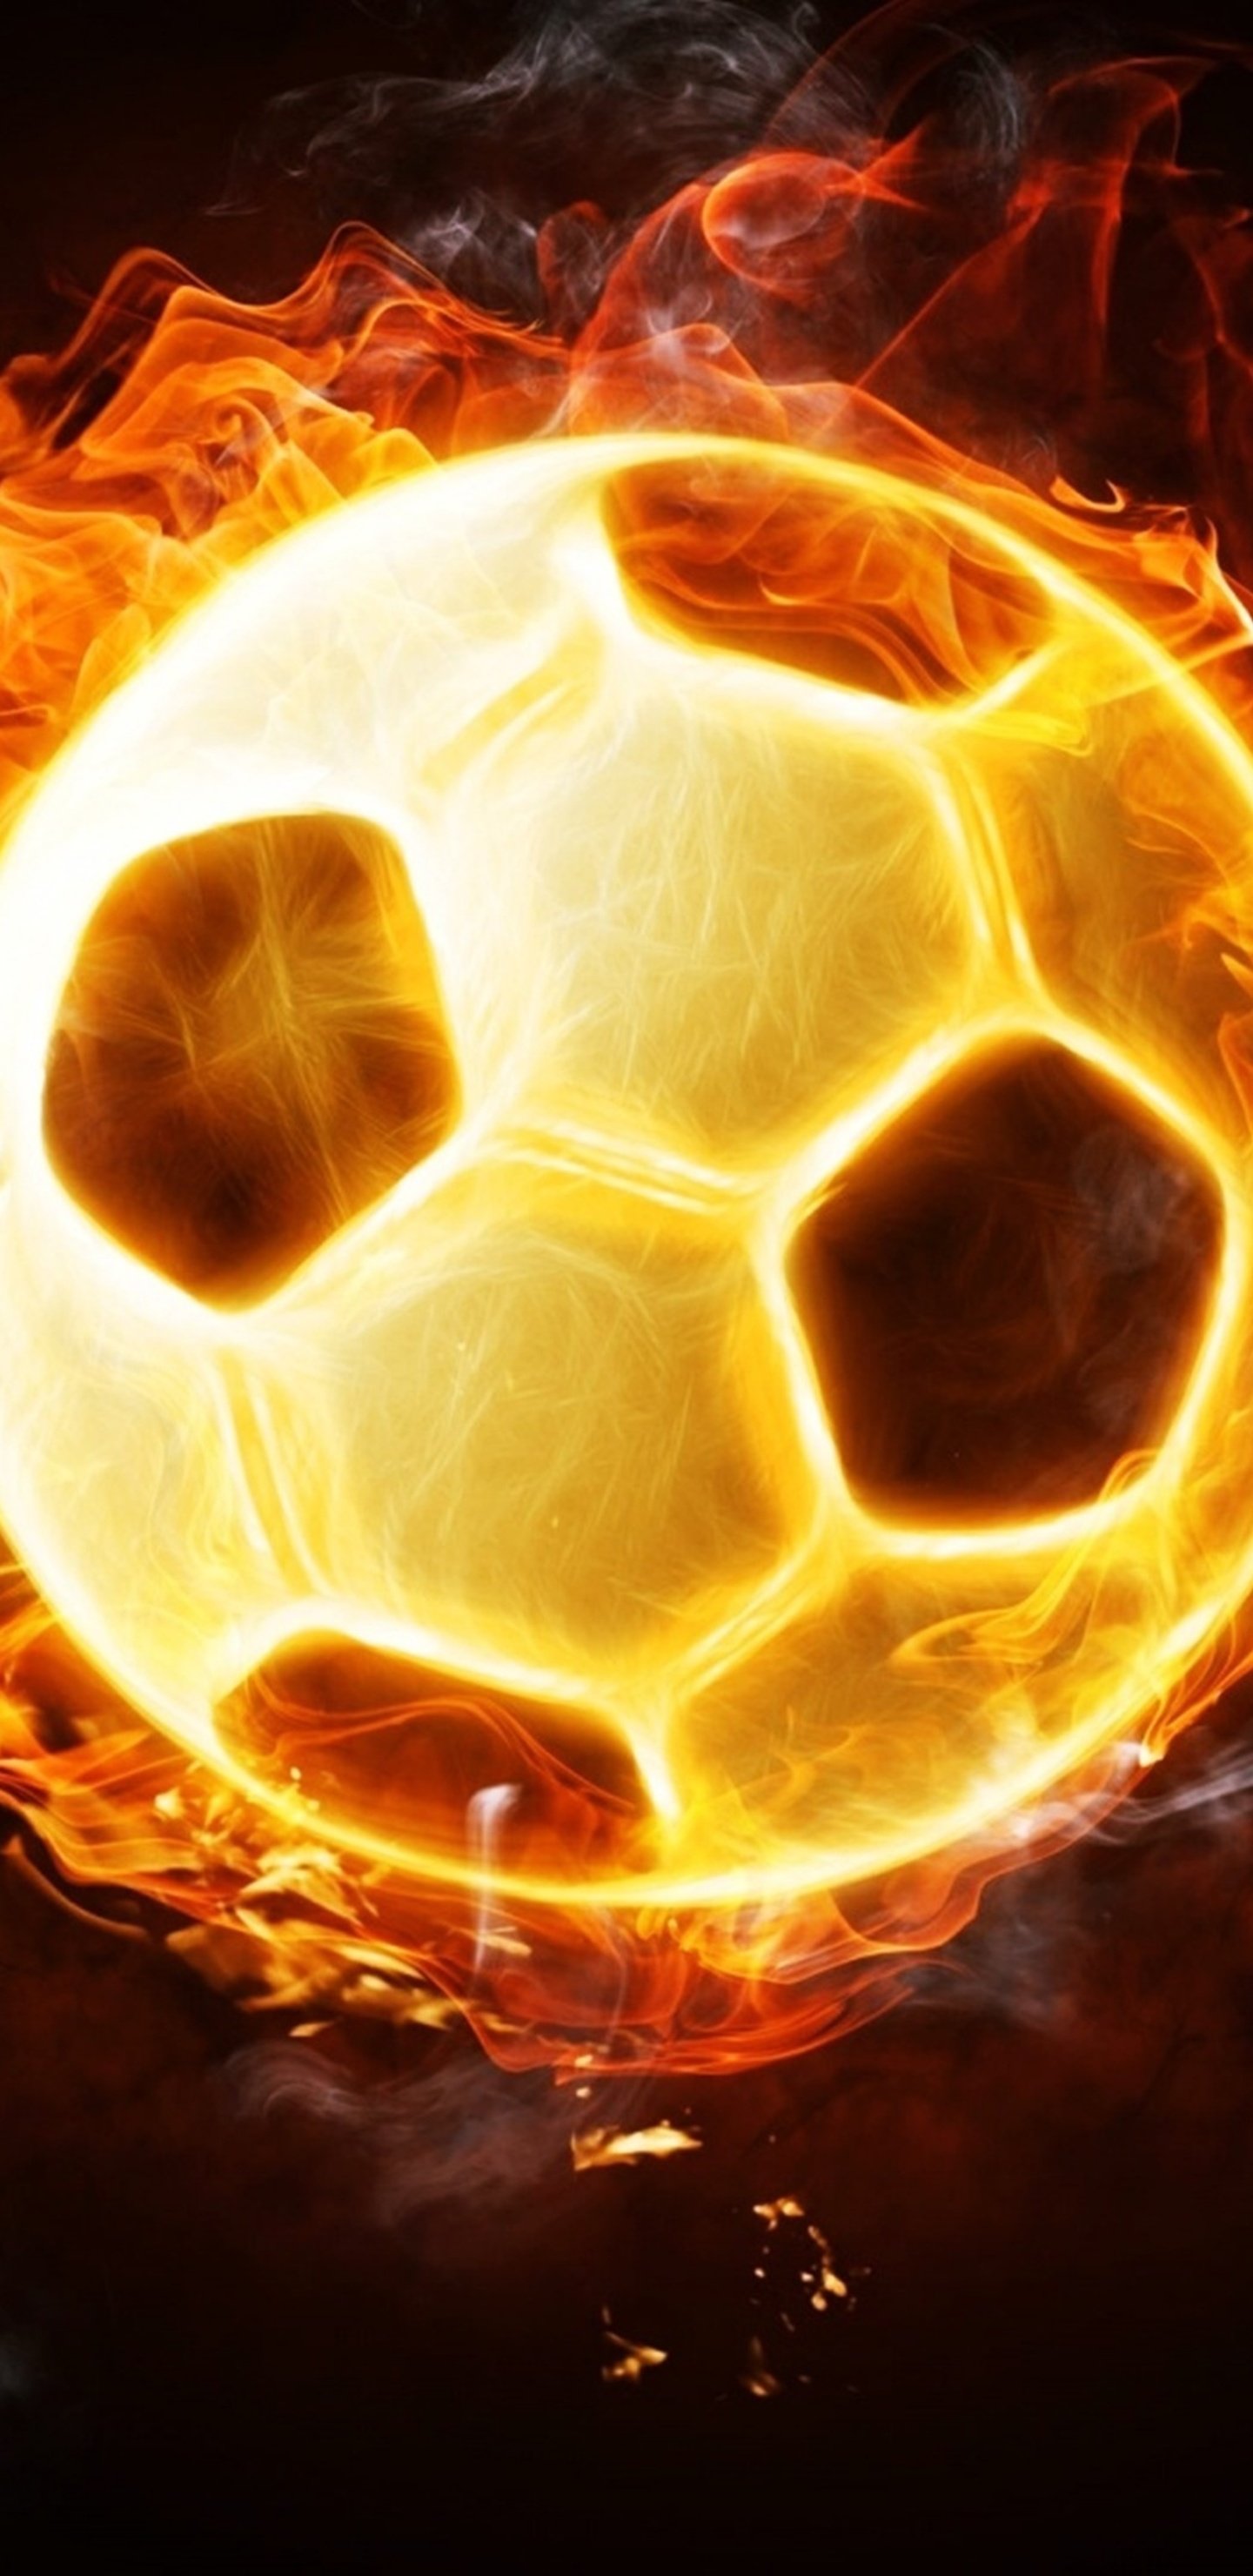 Football Soccer Fire Ball 4k Samsung Galaxy Note S S SQHD HD 4k Wallpaper, Image, Background, Photo and Picture